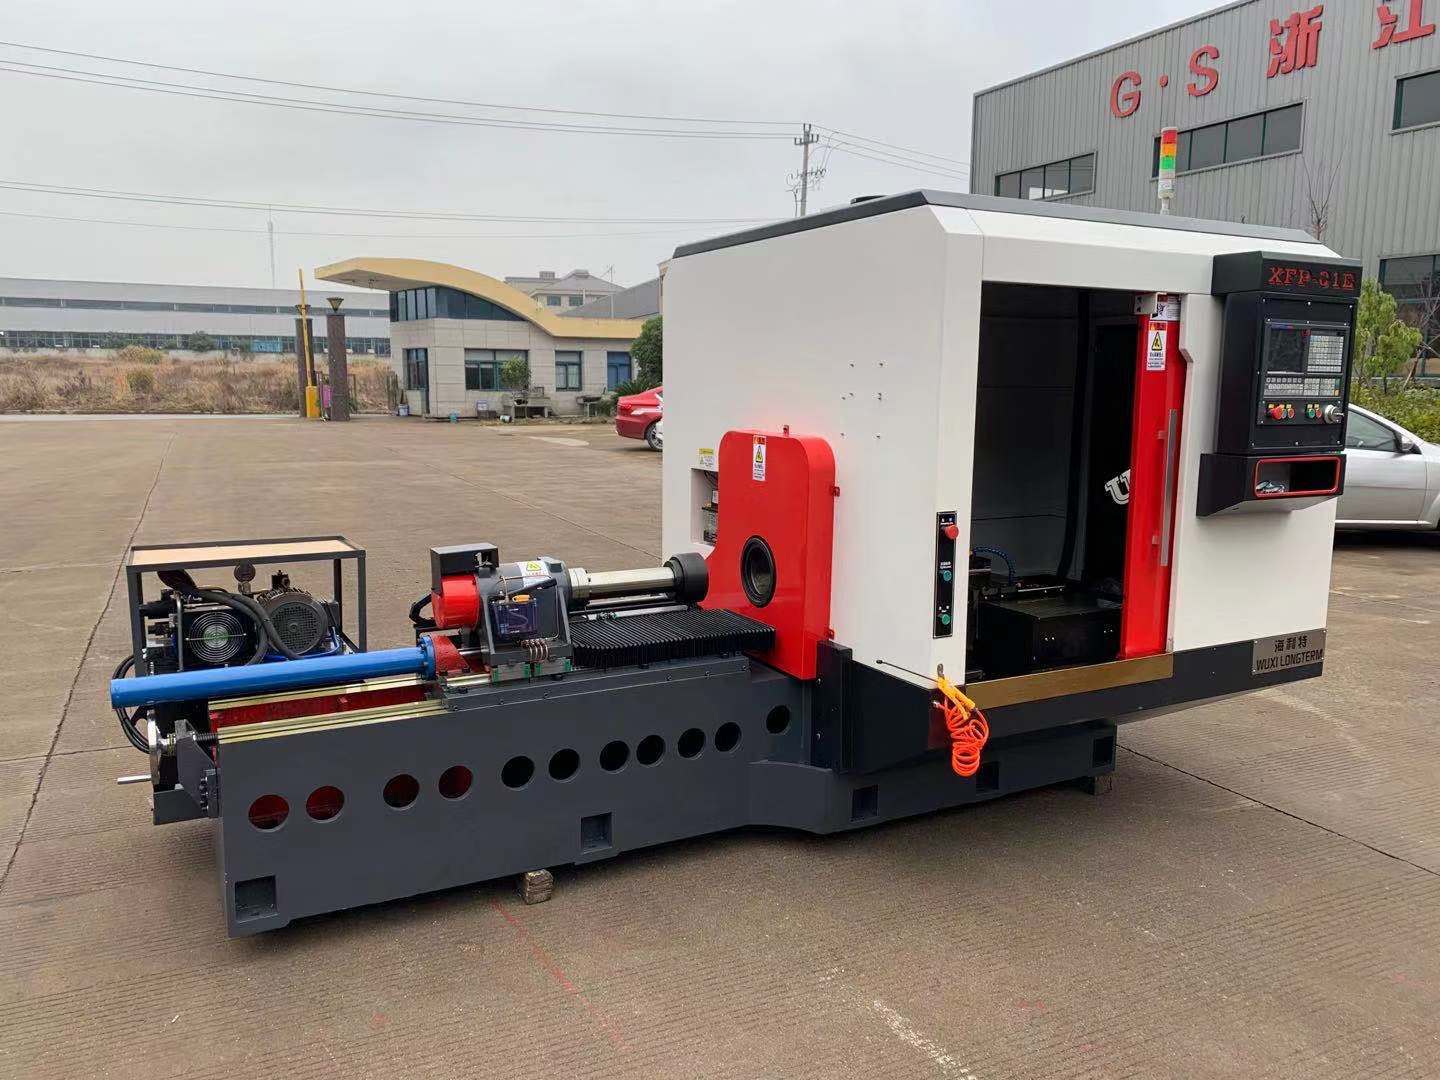 CNC Automatic Pipe Cutting Machine with Automatic Feeding and Loading Maximum Thickness 2mm Ss Ms Pipe Cutting Machine for CNG LPG Cylinders